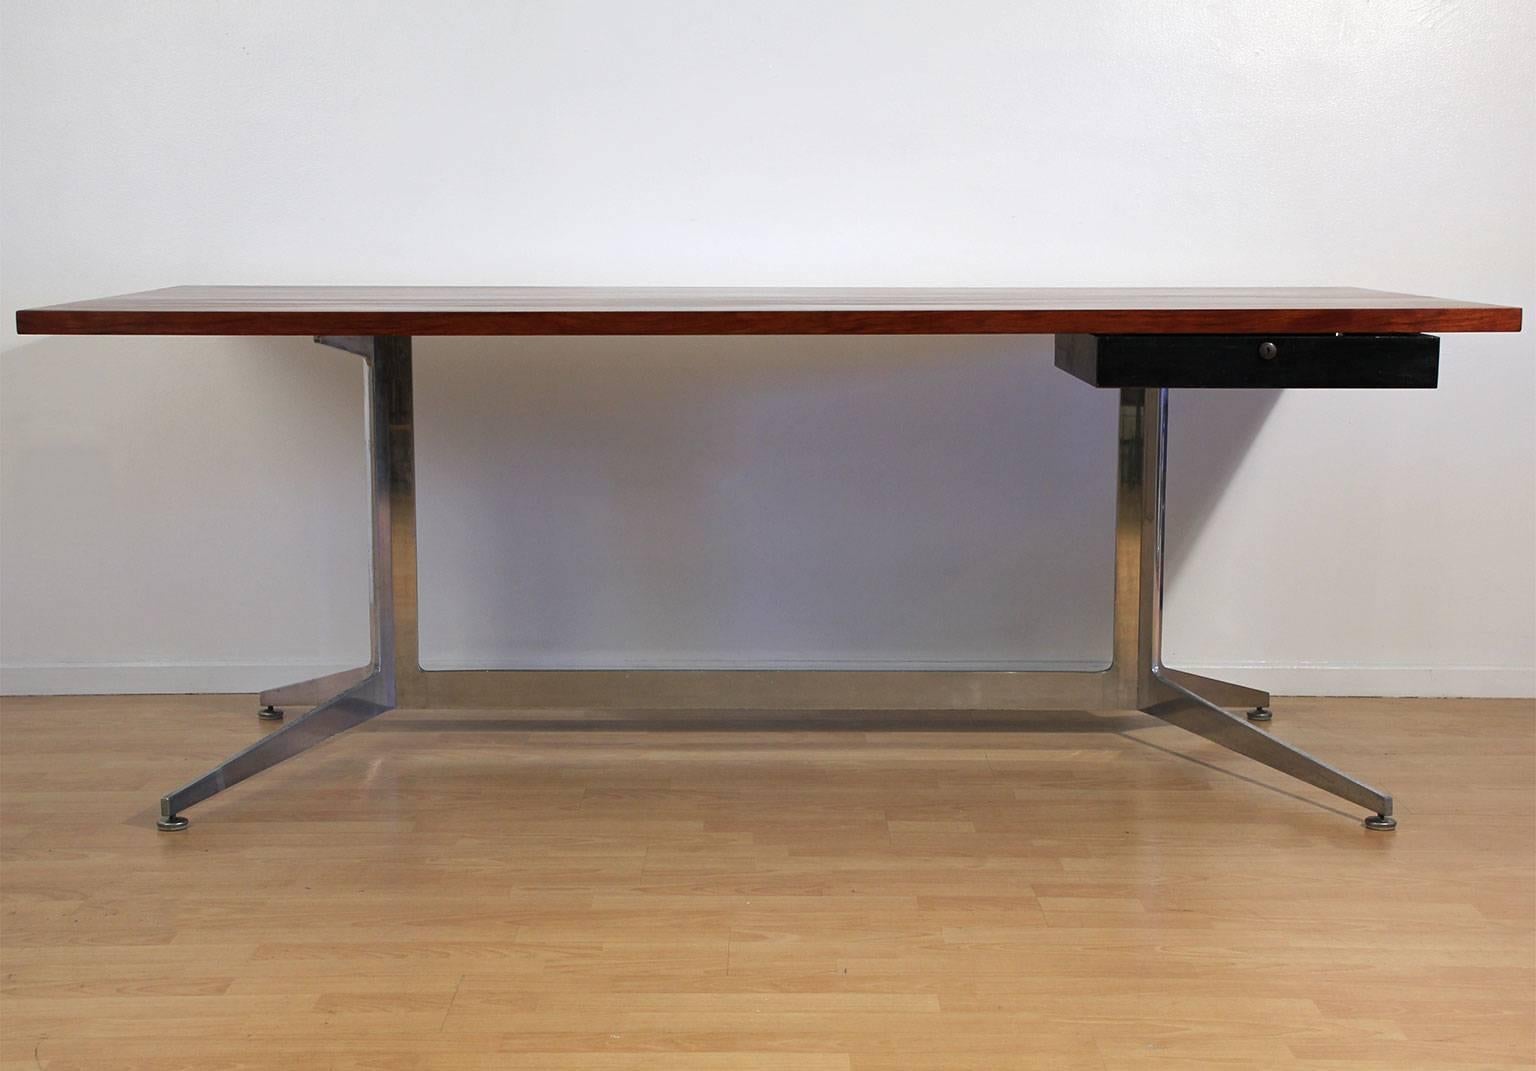 Beautiful rosewood and aluminum desk designed by Ward Bennett for Lehigh Furniture, circa 1960s. Amazing form and design. Rosewood has great color and grain. Top has been refinished and hand oiled to bring out the original beauty of the rosewood